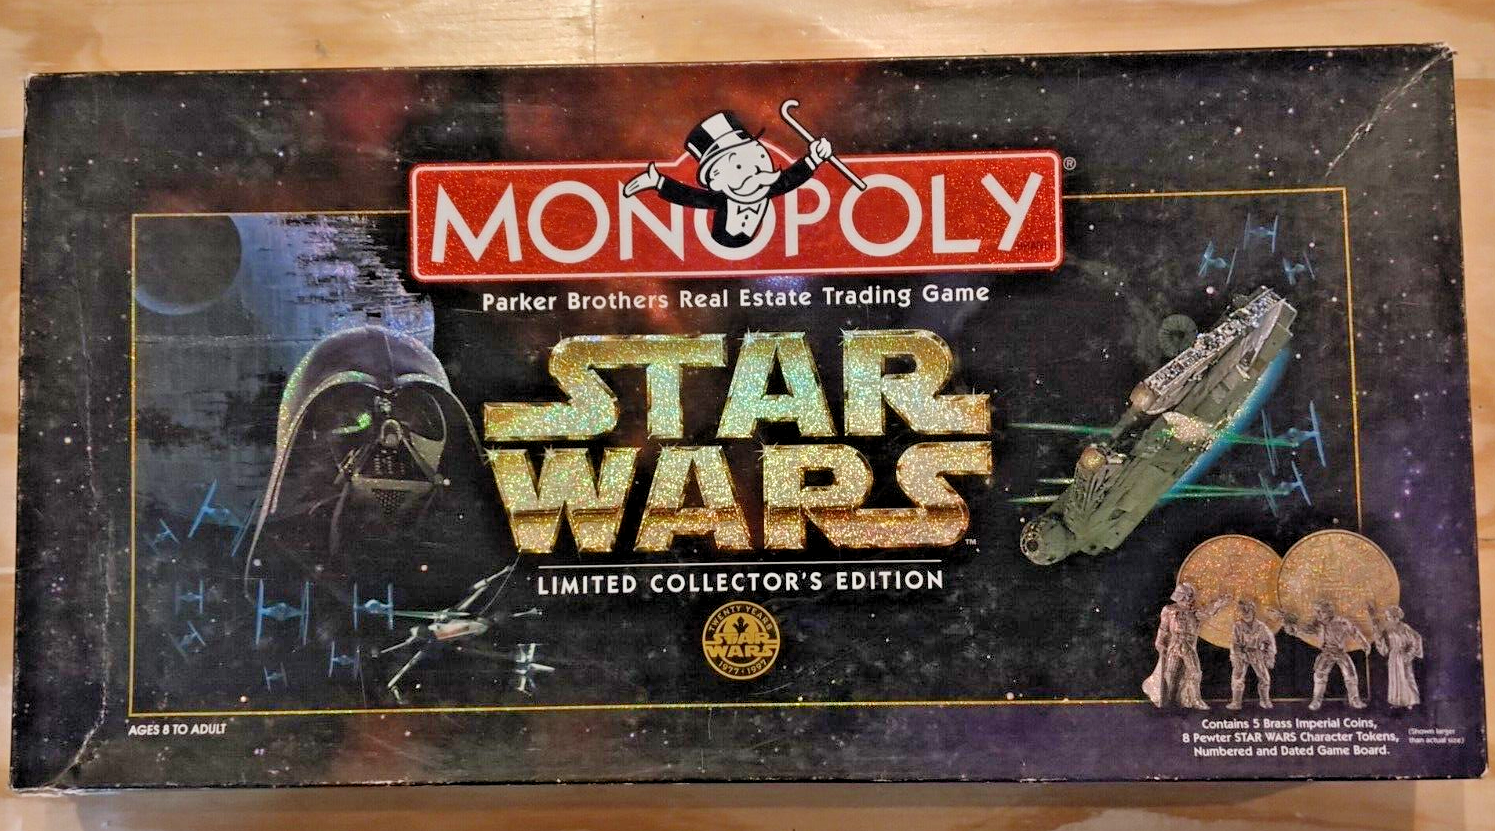 Monopoly Star Wars Limited Collector's Edition No. 40786 Parker Brothers 1996 - $28.15